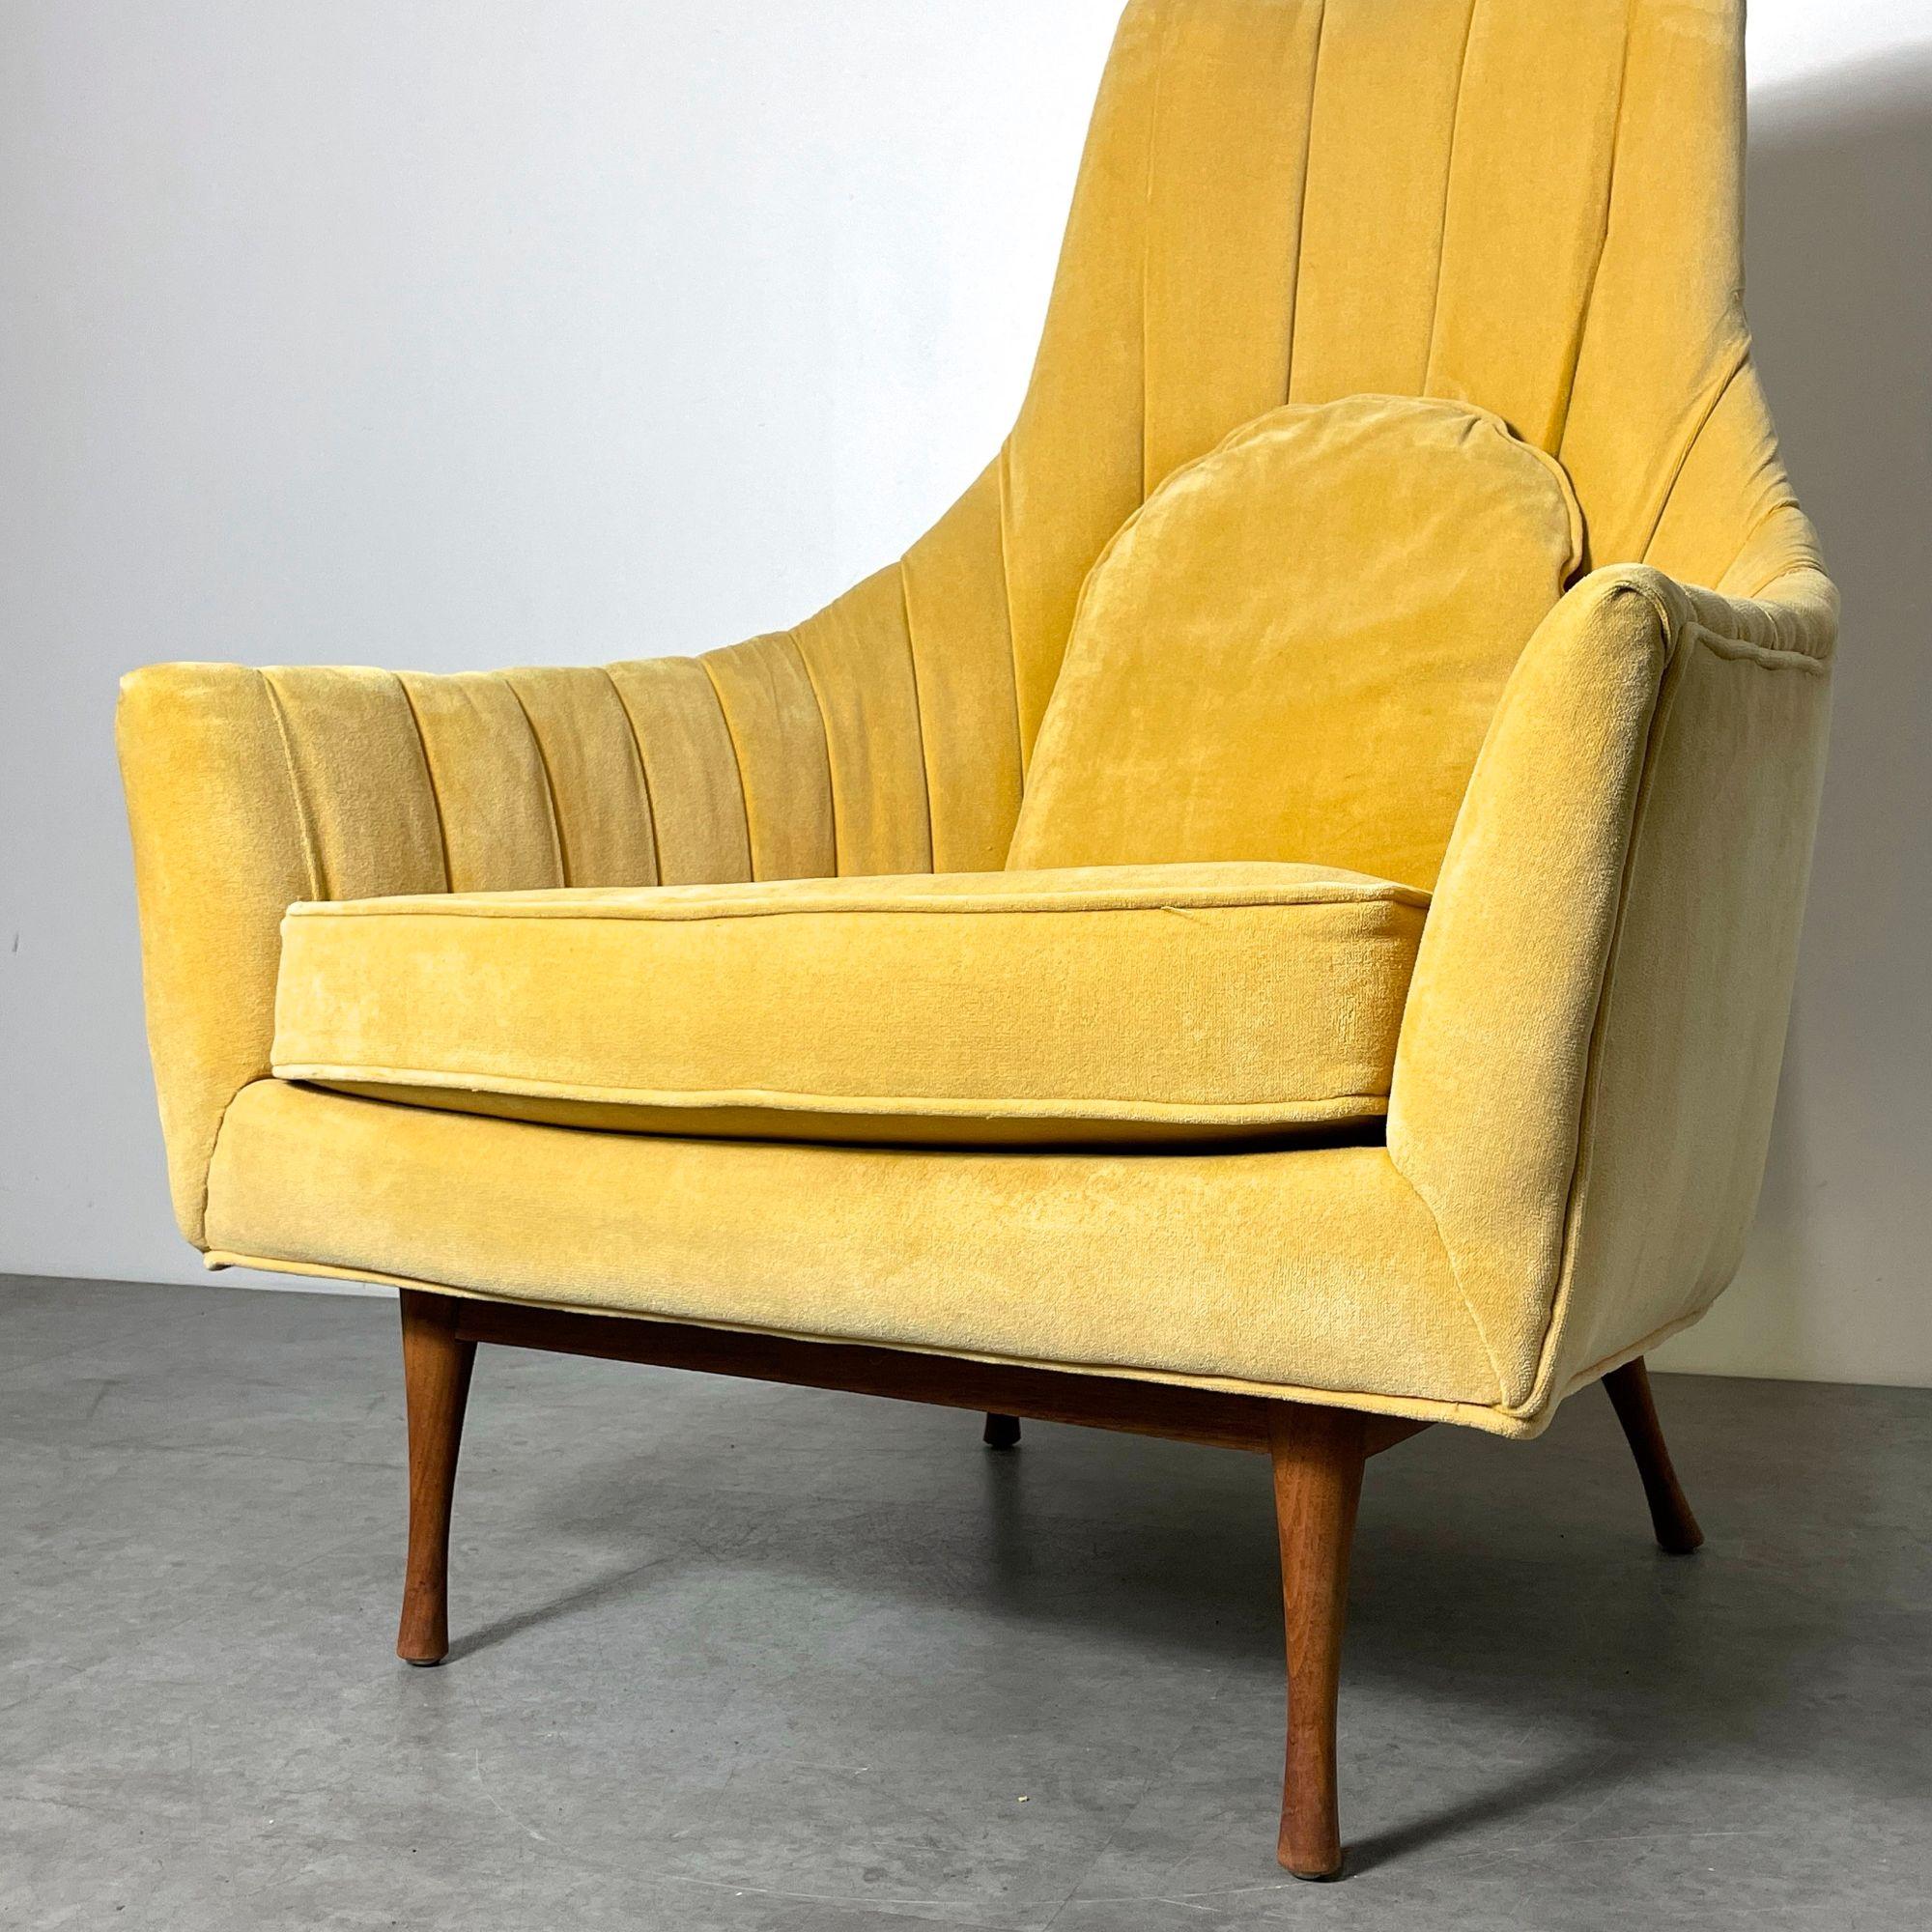 20th Century Vintage Yellow Symmetric Group Lounge Chair by Paul McCobb for Widdicomb 1960s